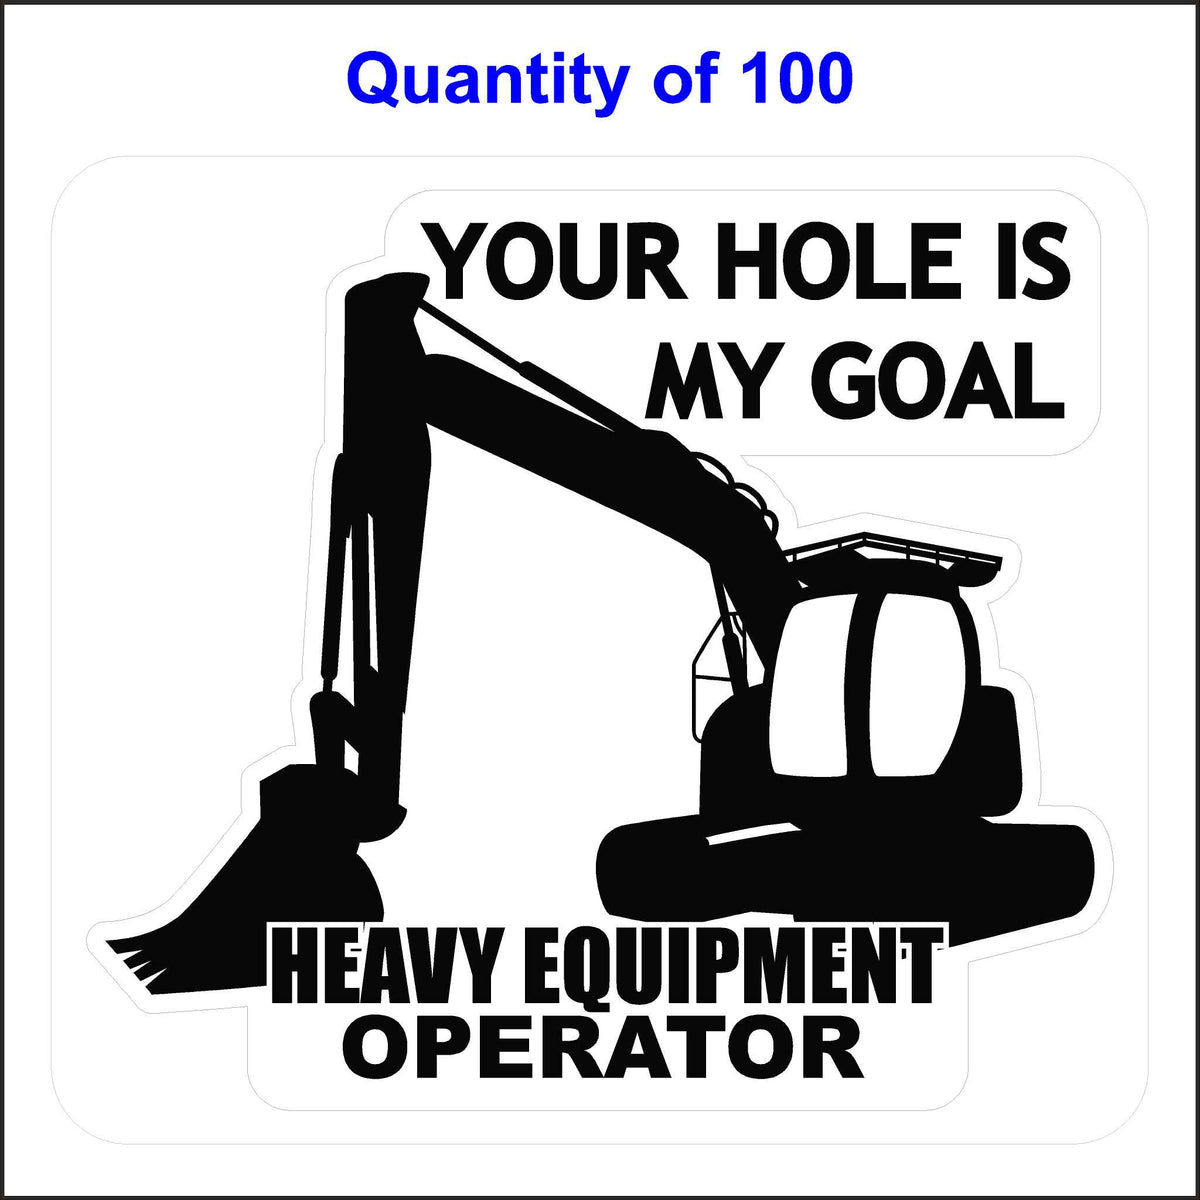 Heavy Equipment Operator Sticker. Your Hole Is My Goal Sticker. 100 Quantity.